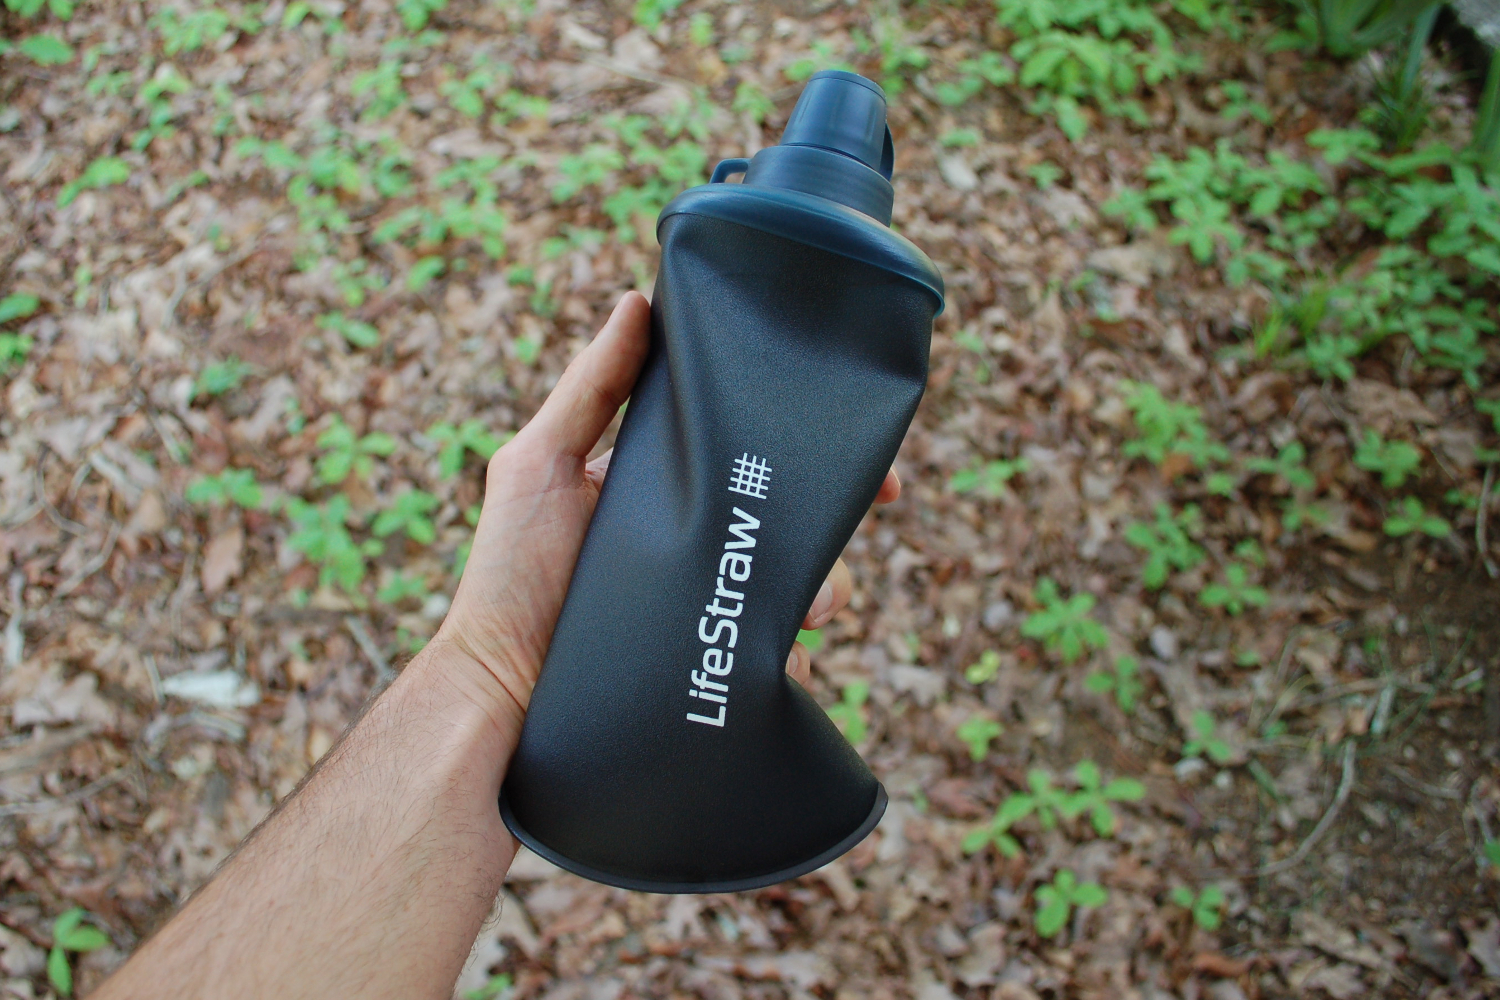 LifeStraw Peak Series Collapsible Squeeze Water Bottle Filter 1L